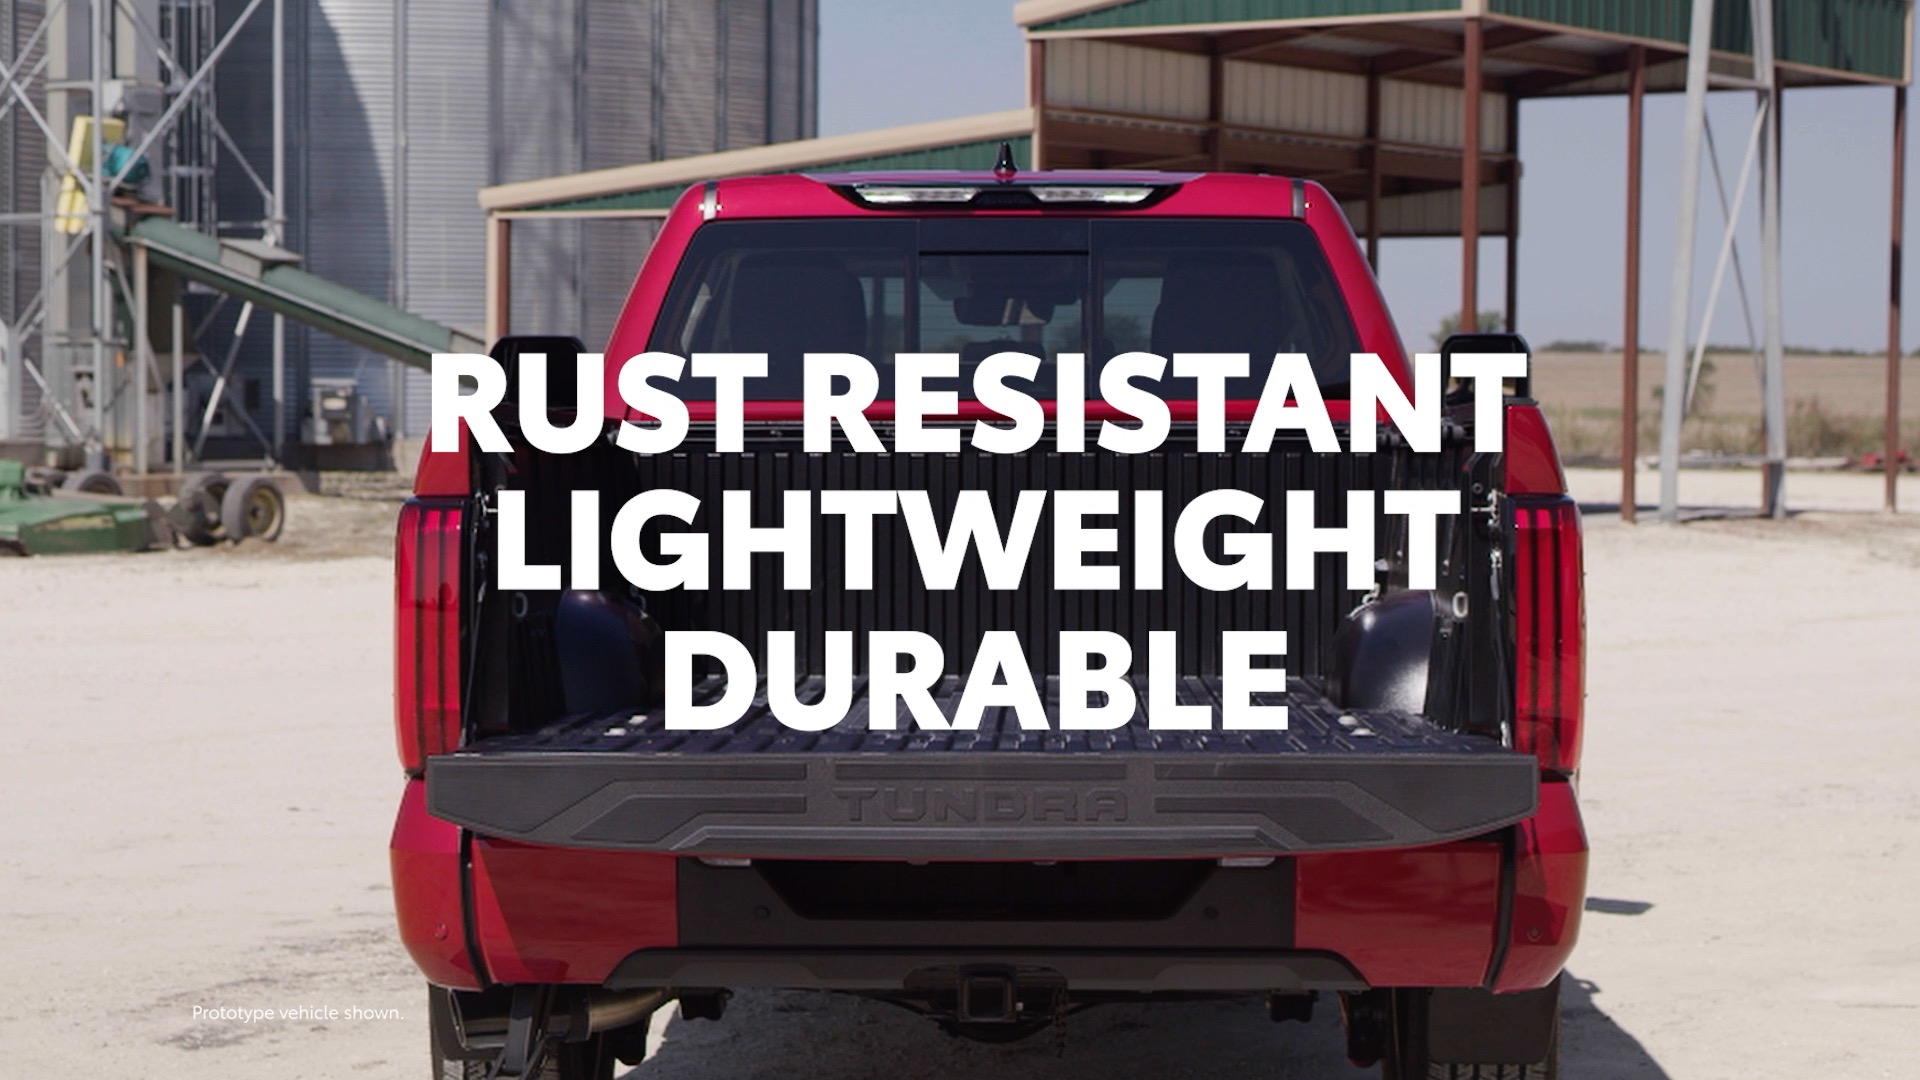 Toyota Tundra Truck Bed Durability Test | It’s a YouTube | 1st Festa, The films nominated.